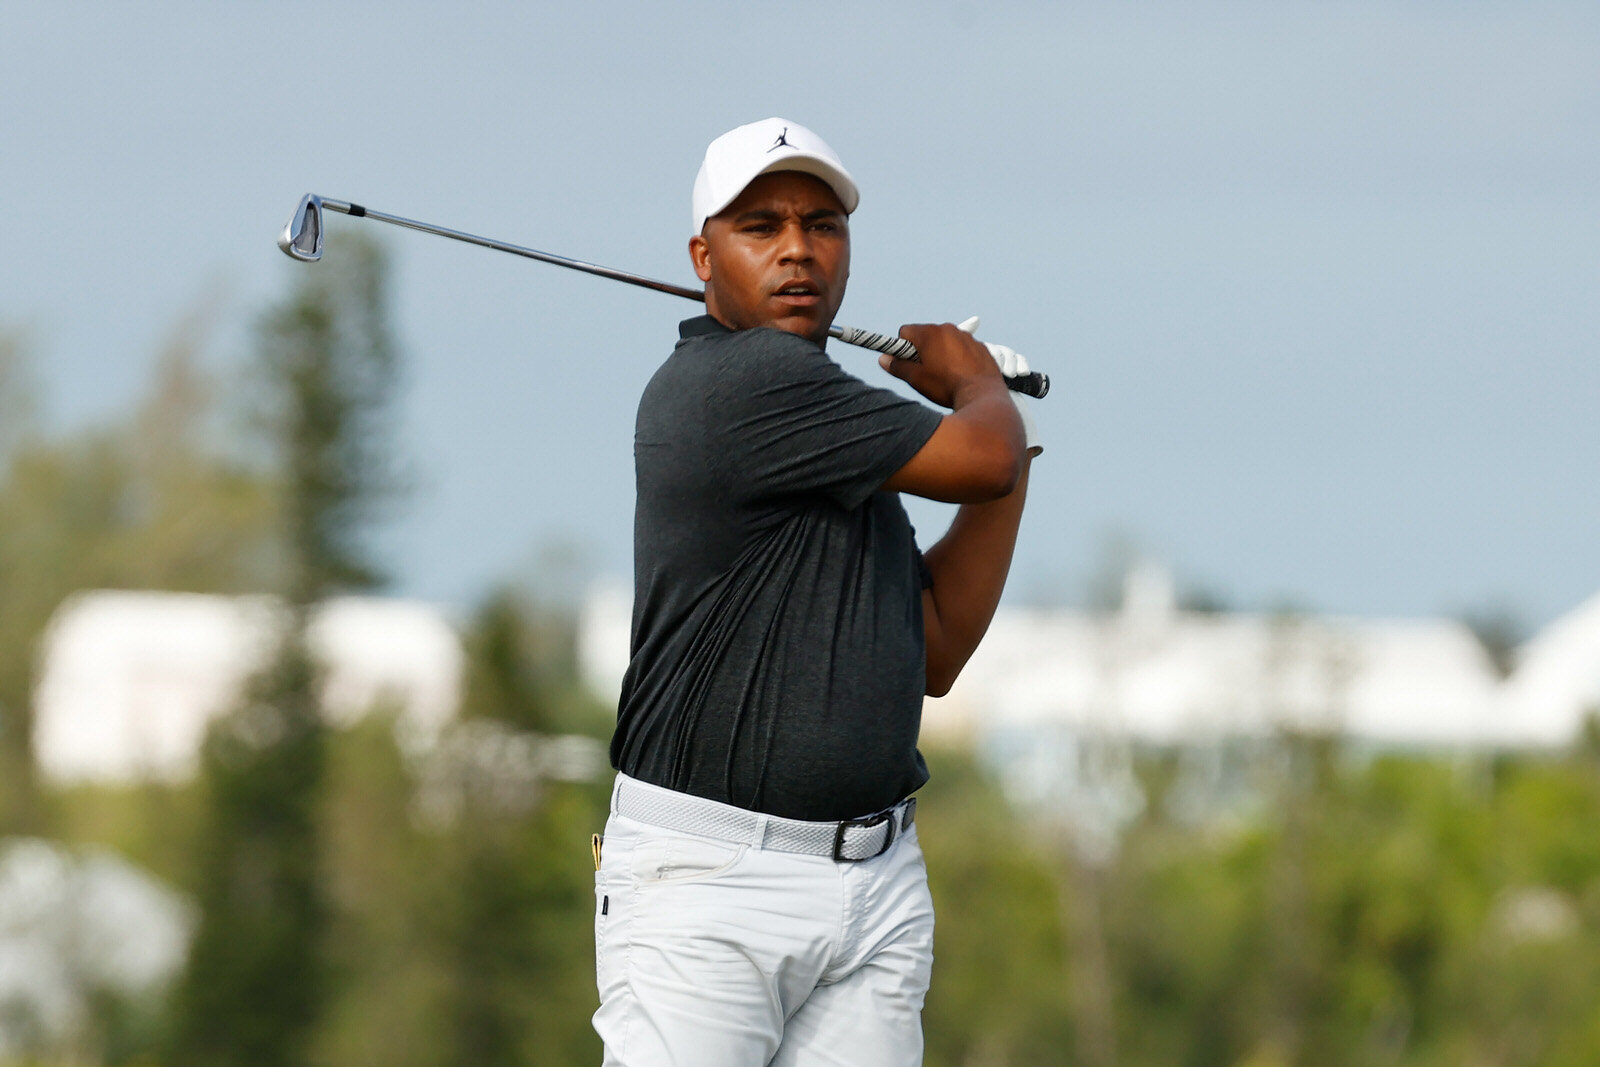  SOUTHAMPTON, BERMUDA - OCTOBER 29: Harold Varner III of the United States plays his shot from the tenth tee during the first round of the Bermuda Championship at Port Royal Golf Course on October 29, 2020 in Southampton, Bermuda. (Photo by Gregory S